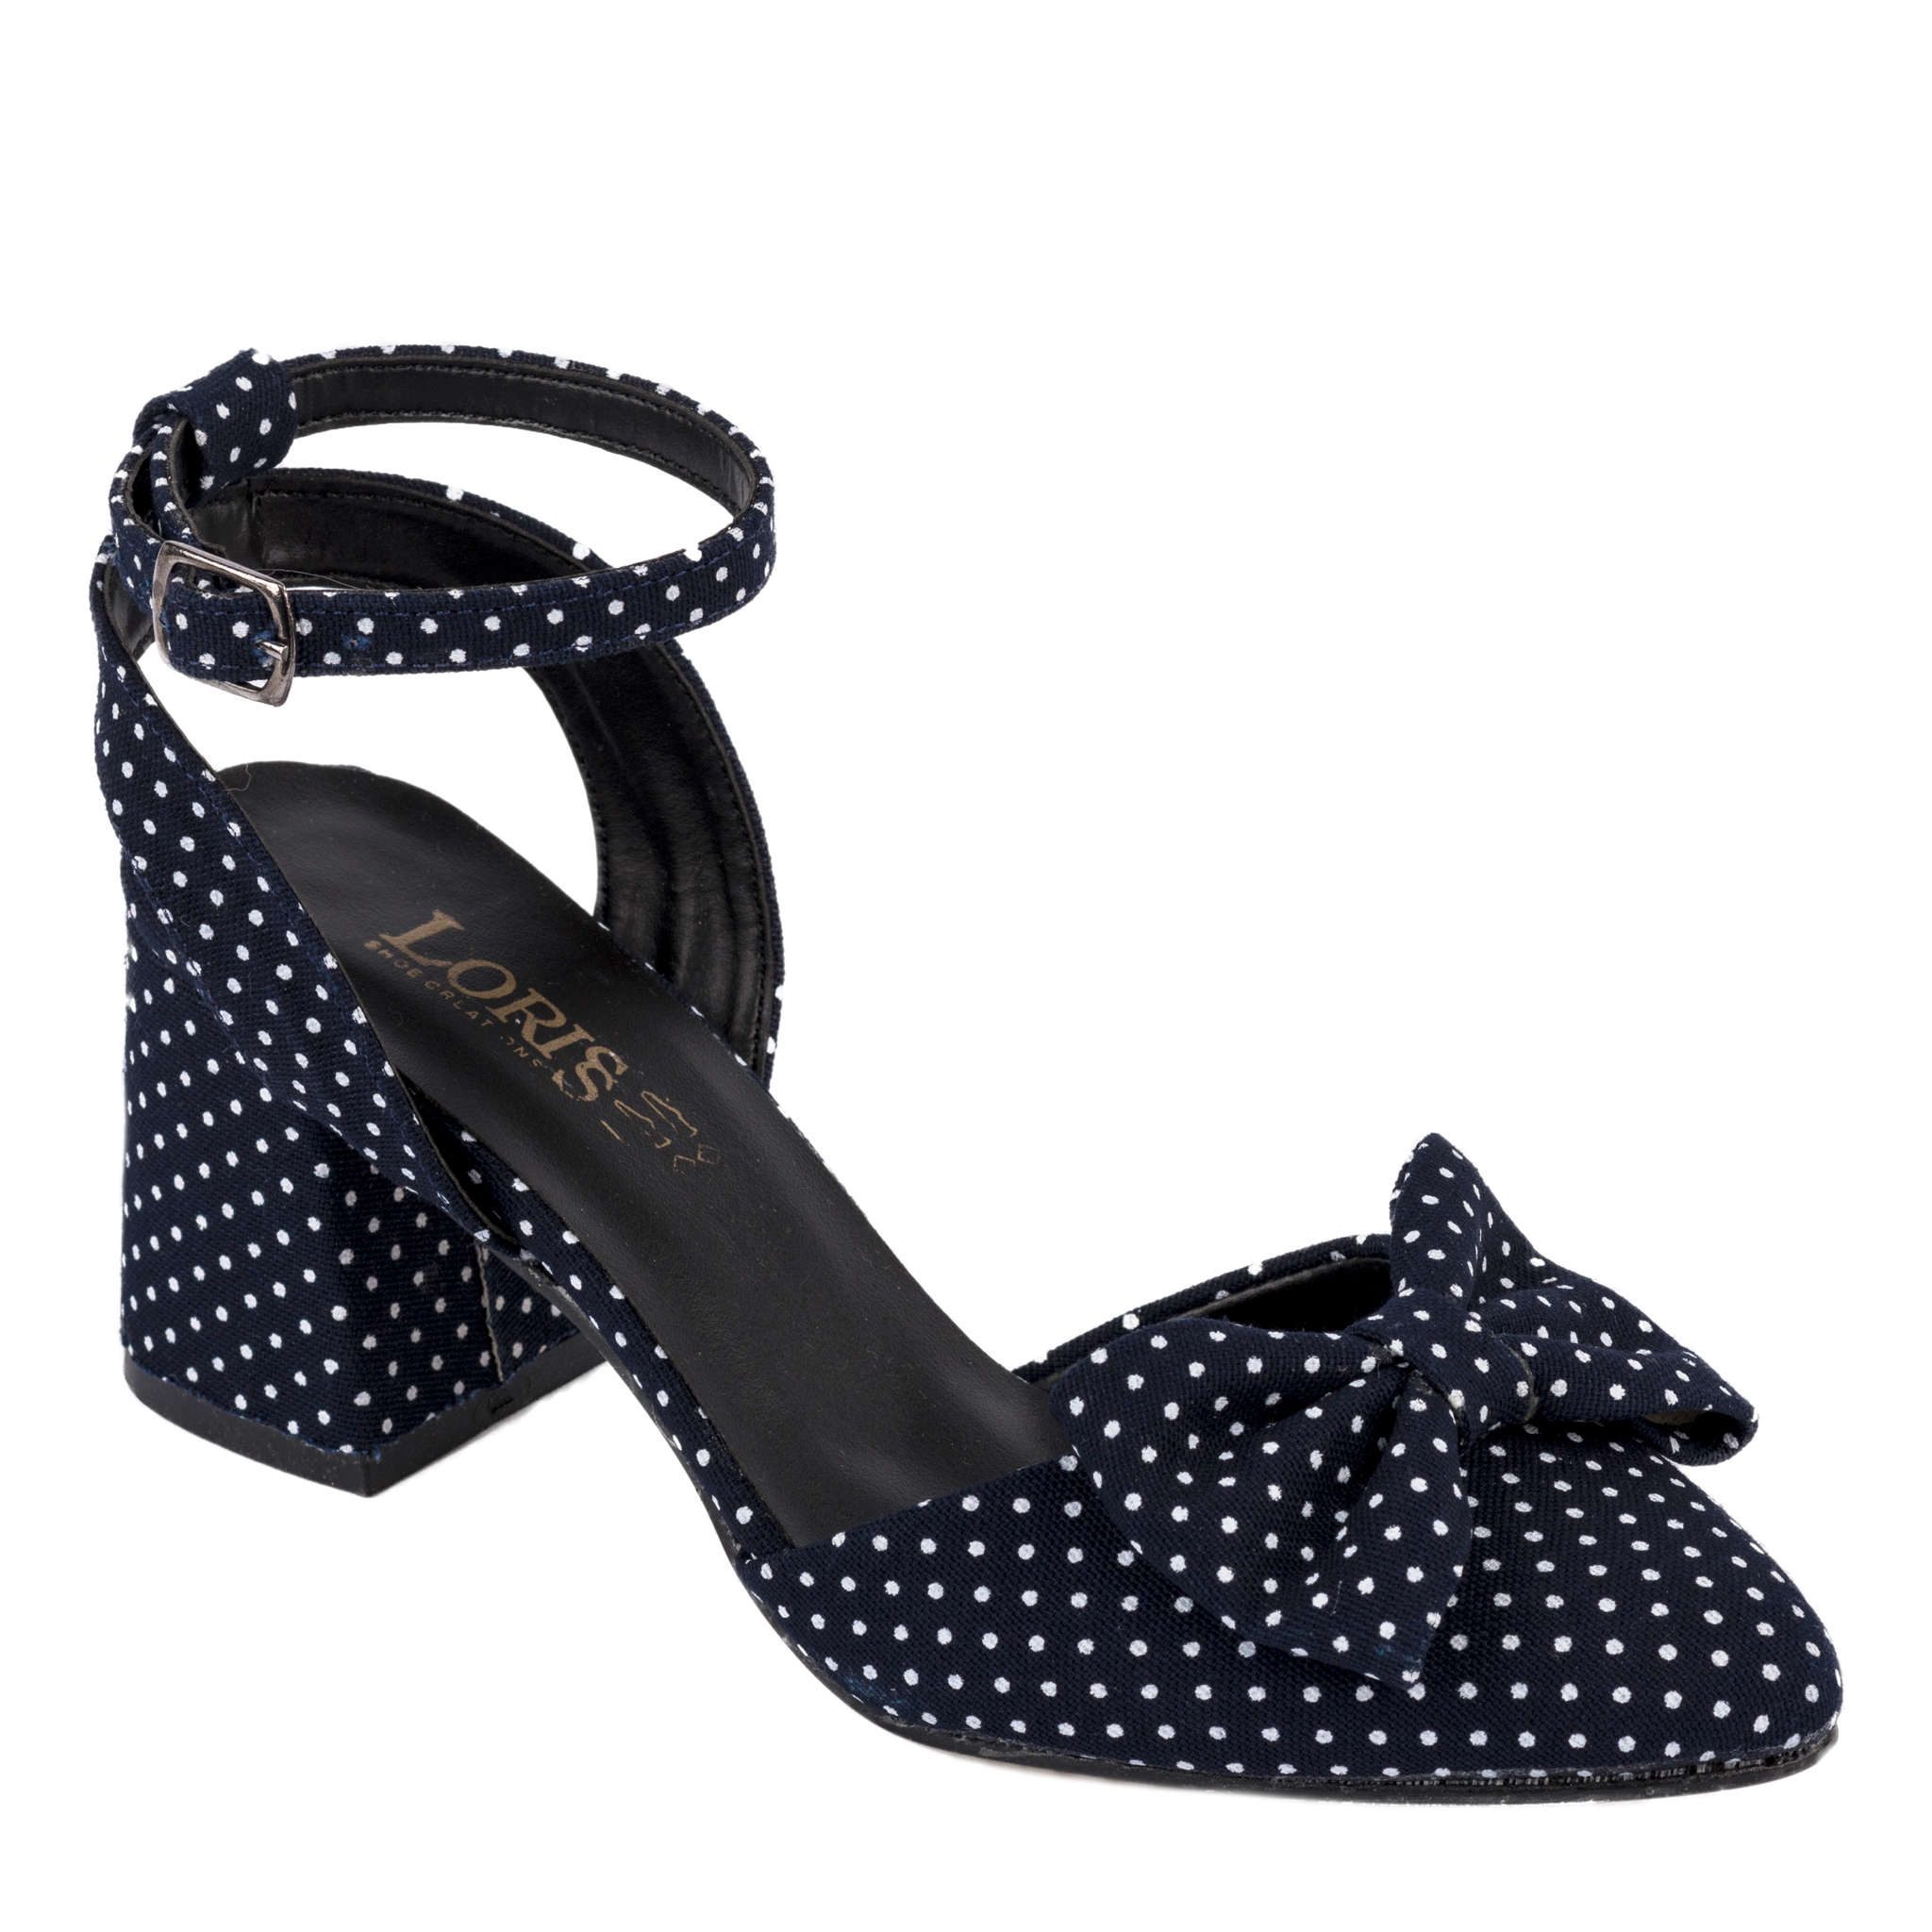 SANDALS WITH DOTS AND BOW - NAVY BLUE